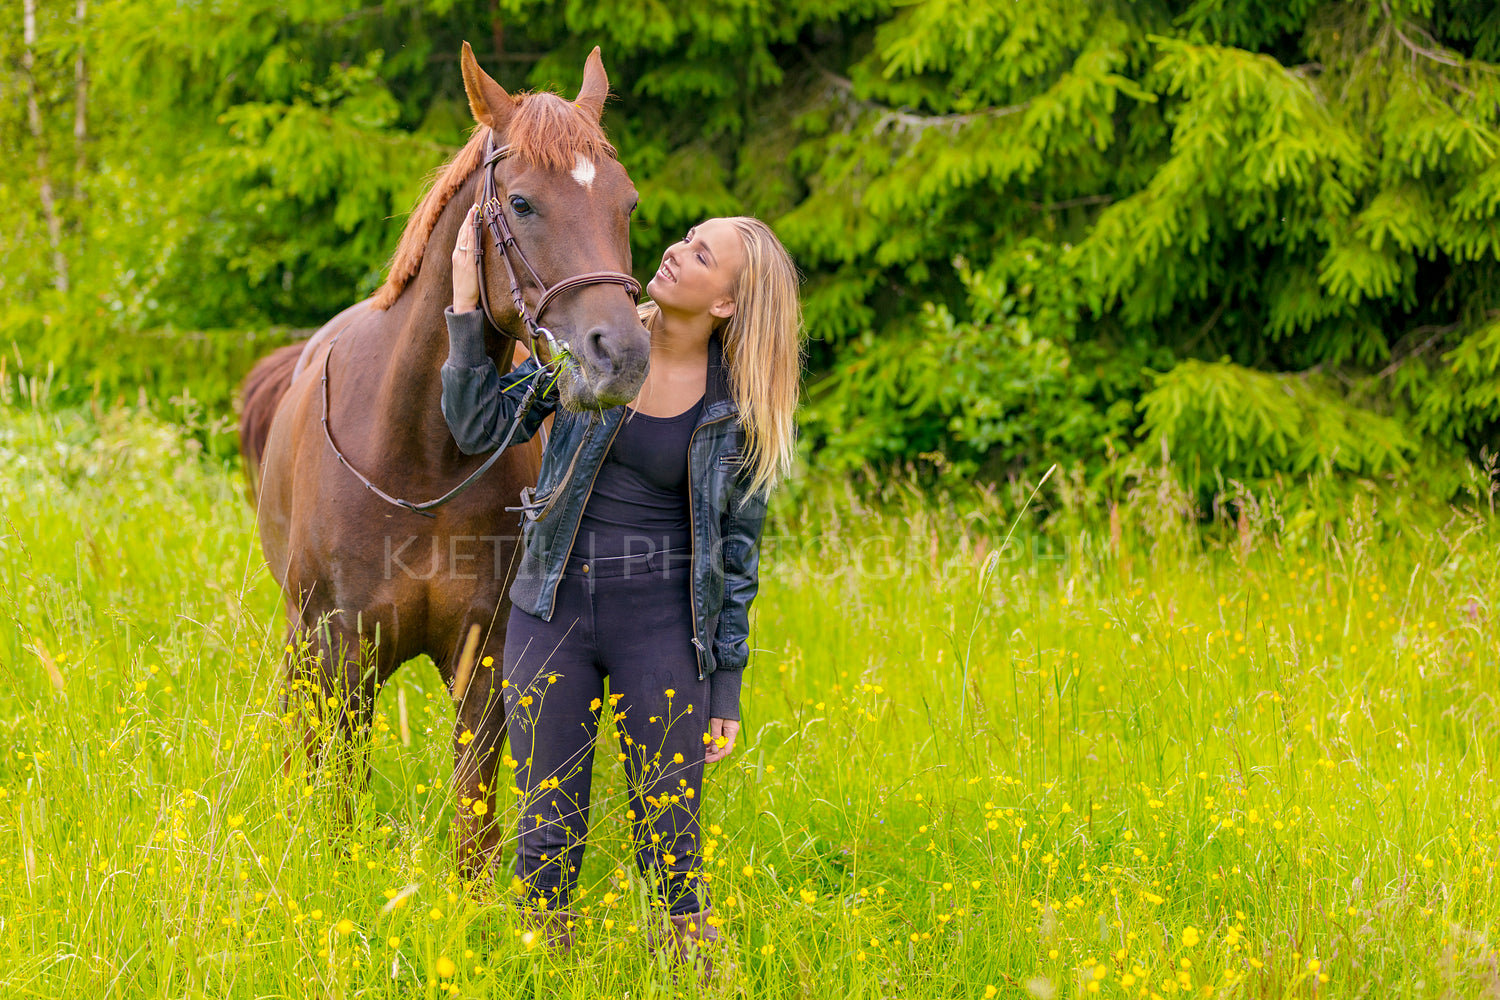 Smiling young woman feeding her arabian horse with snacks in the field